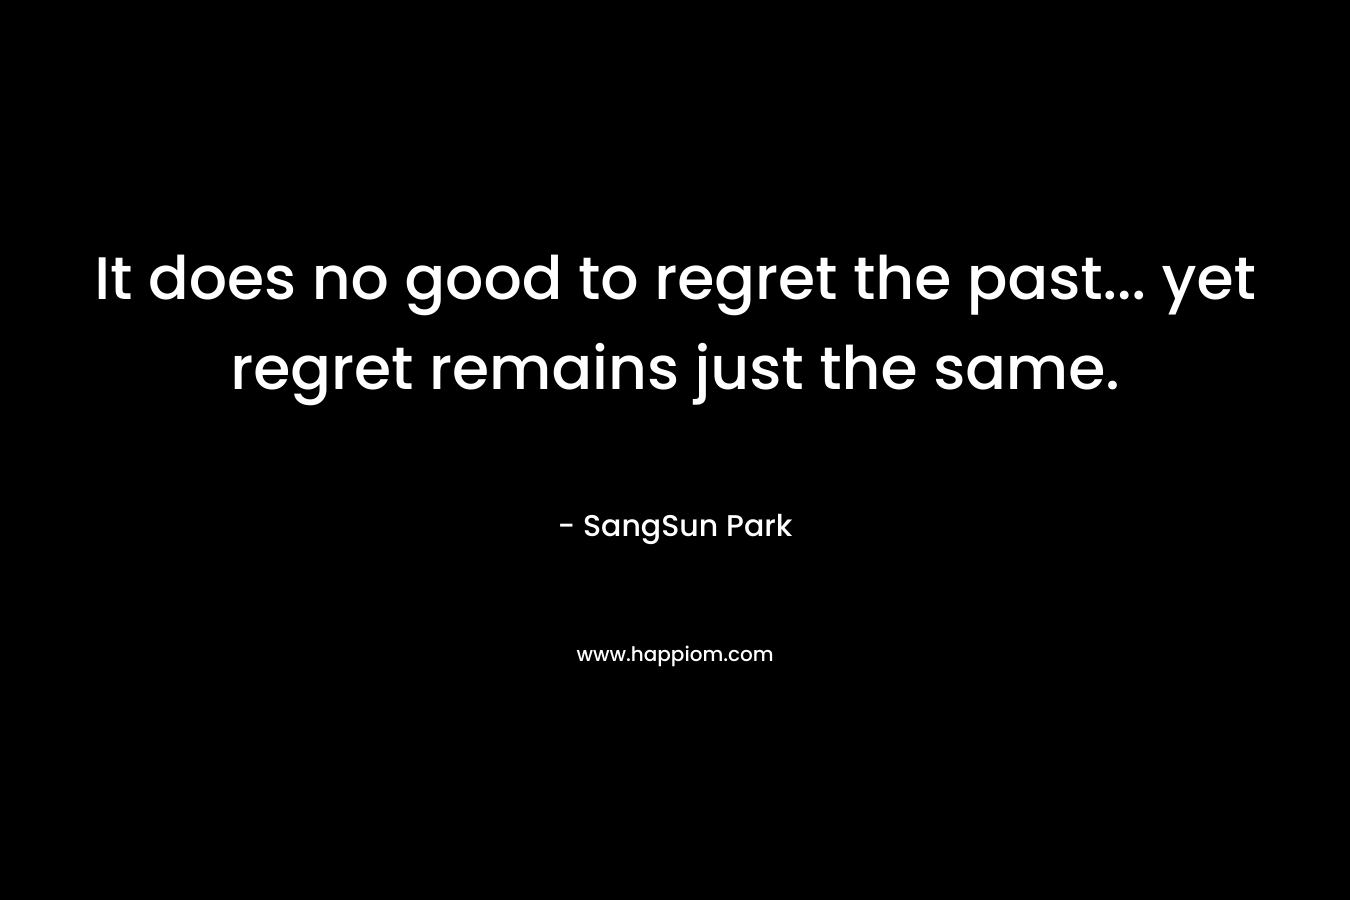 It does no good to regret the past... yet regret remains just the same.